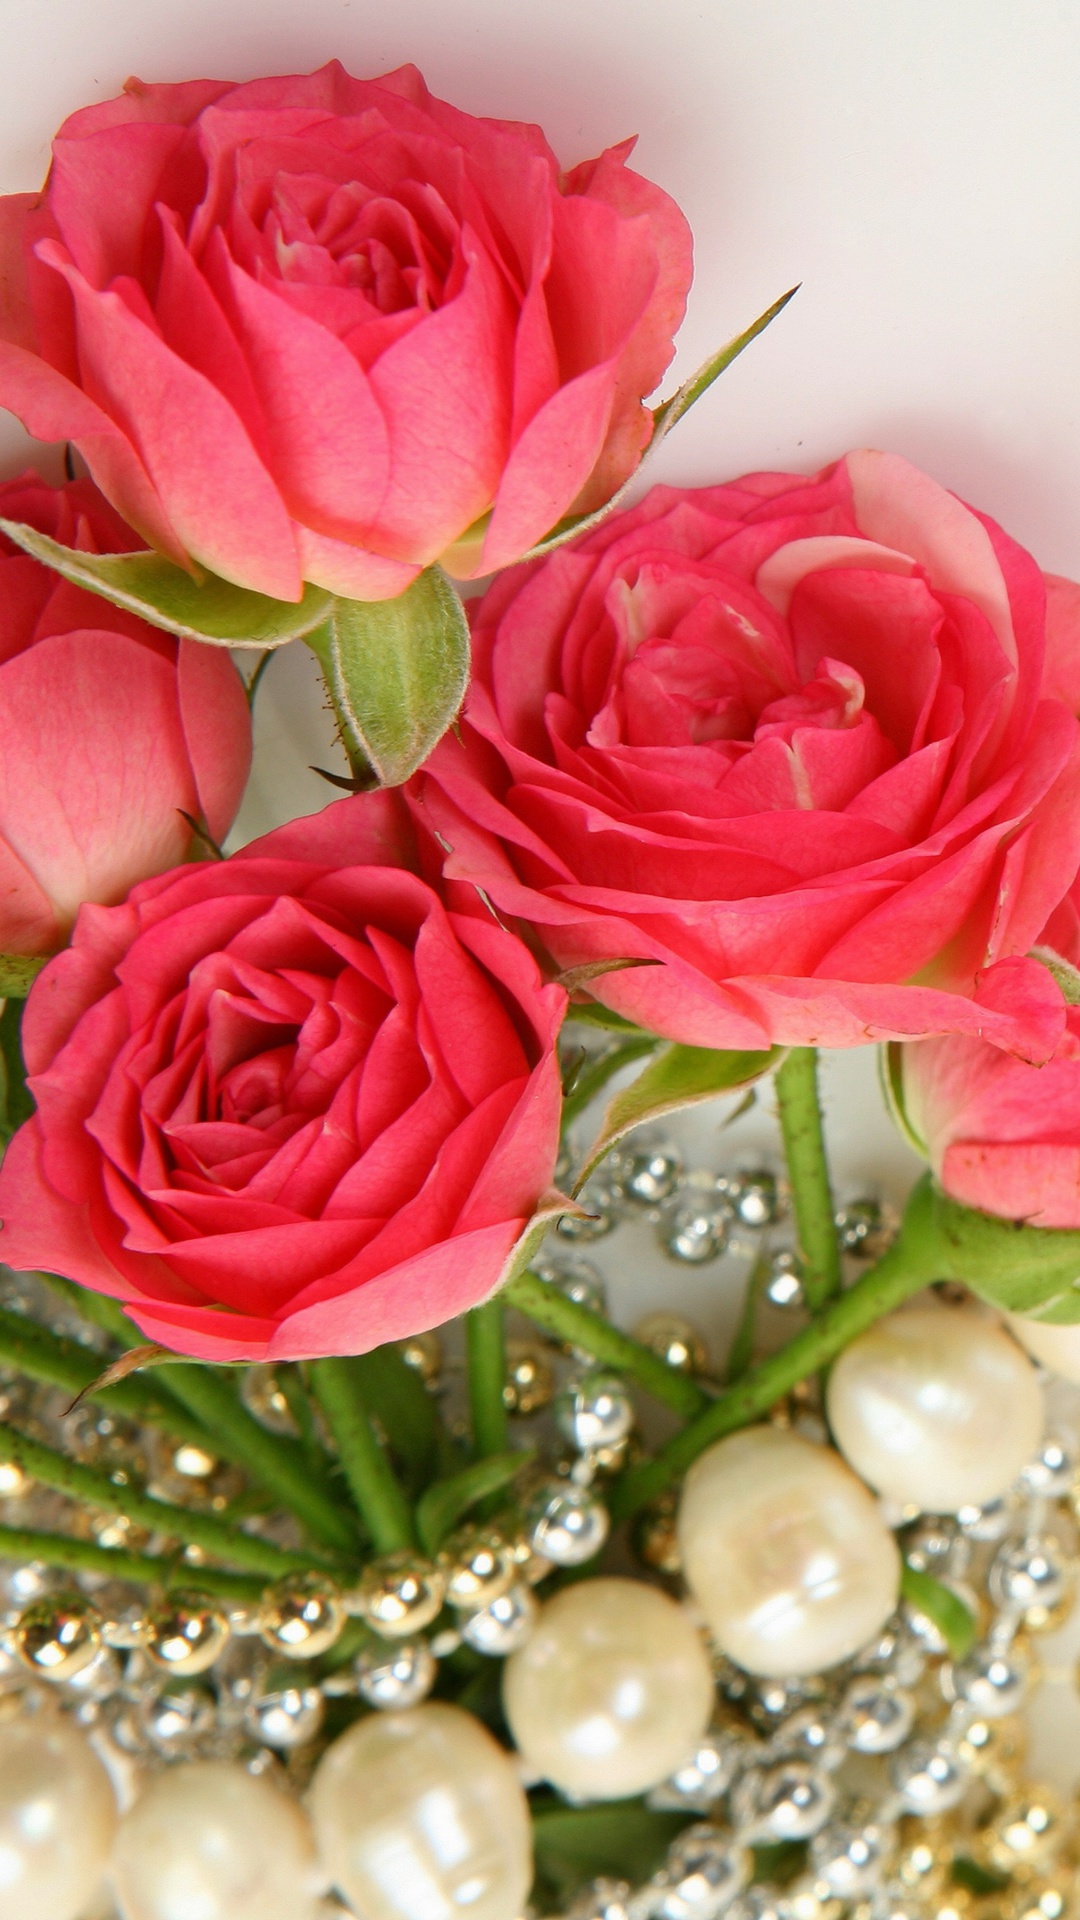 Necklace and Roses Bouquet wallpaper 1080x1920